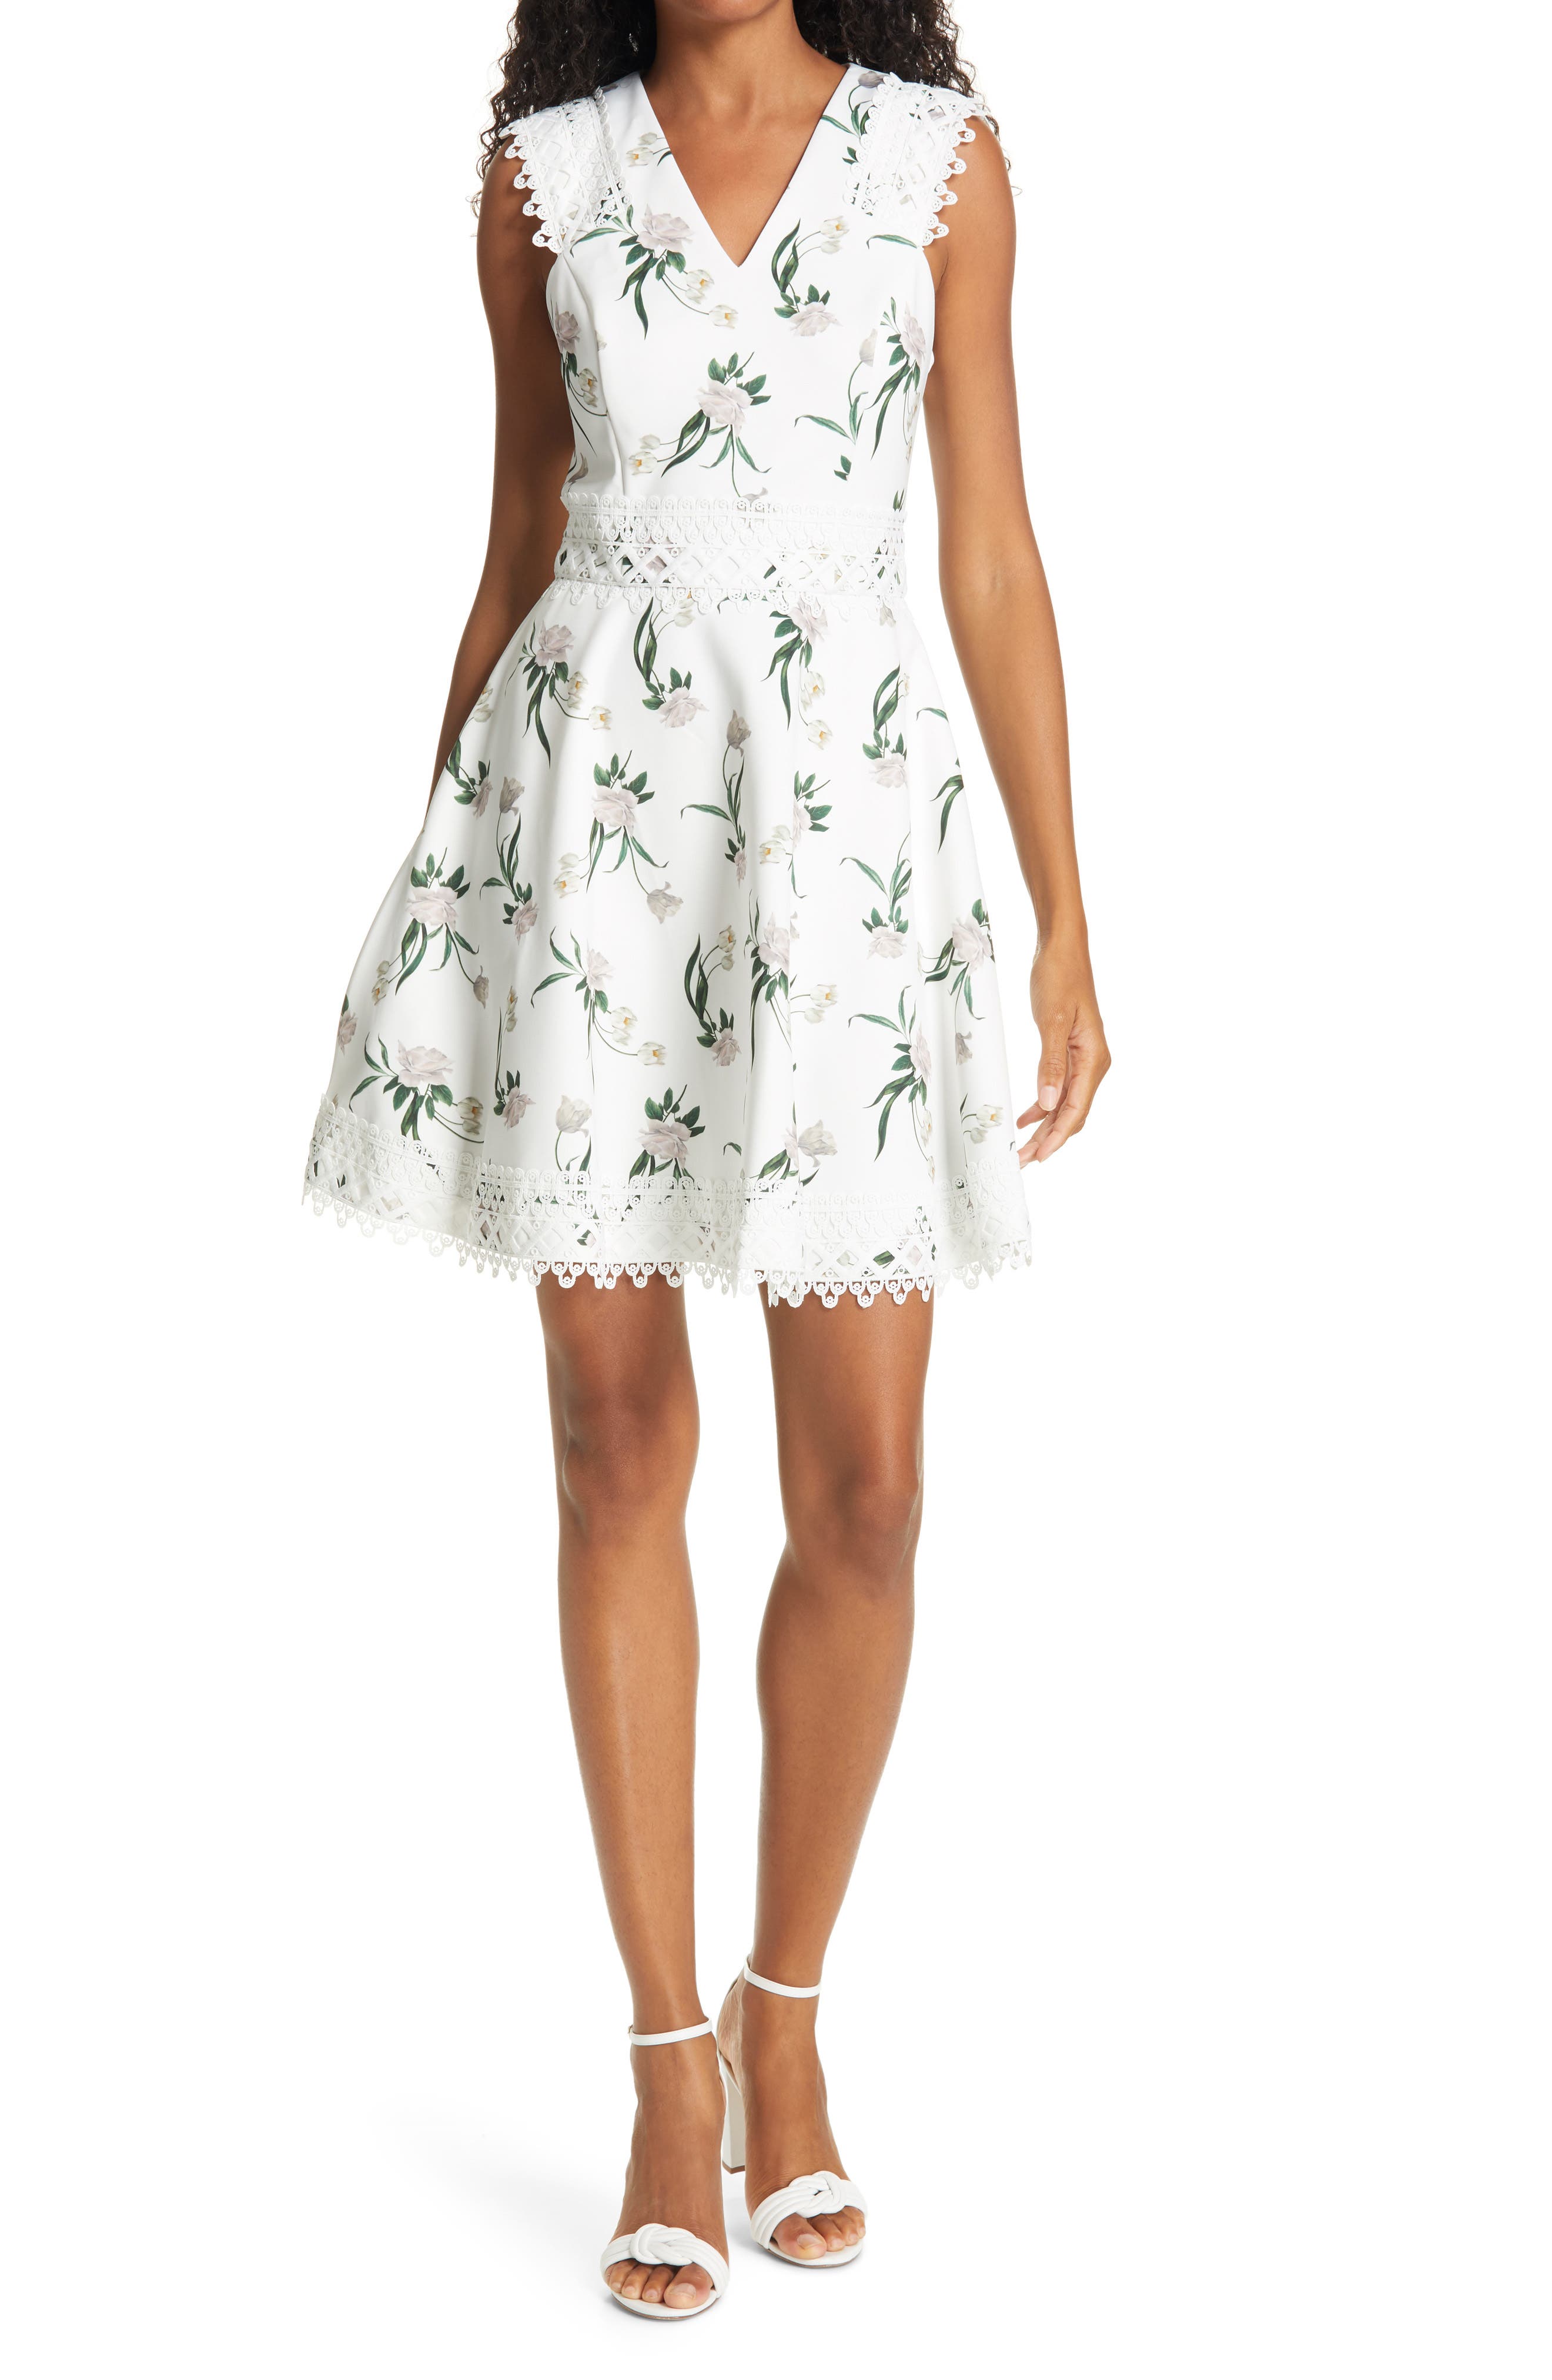 white lace dress nordstrom